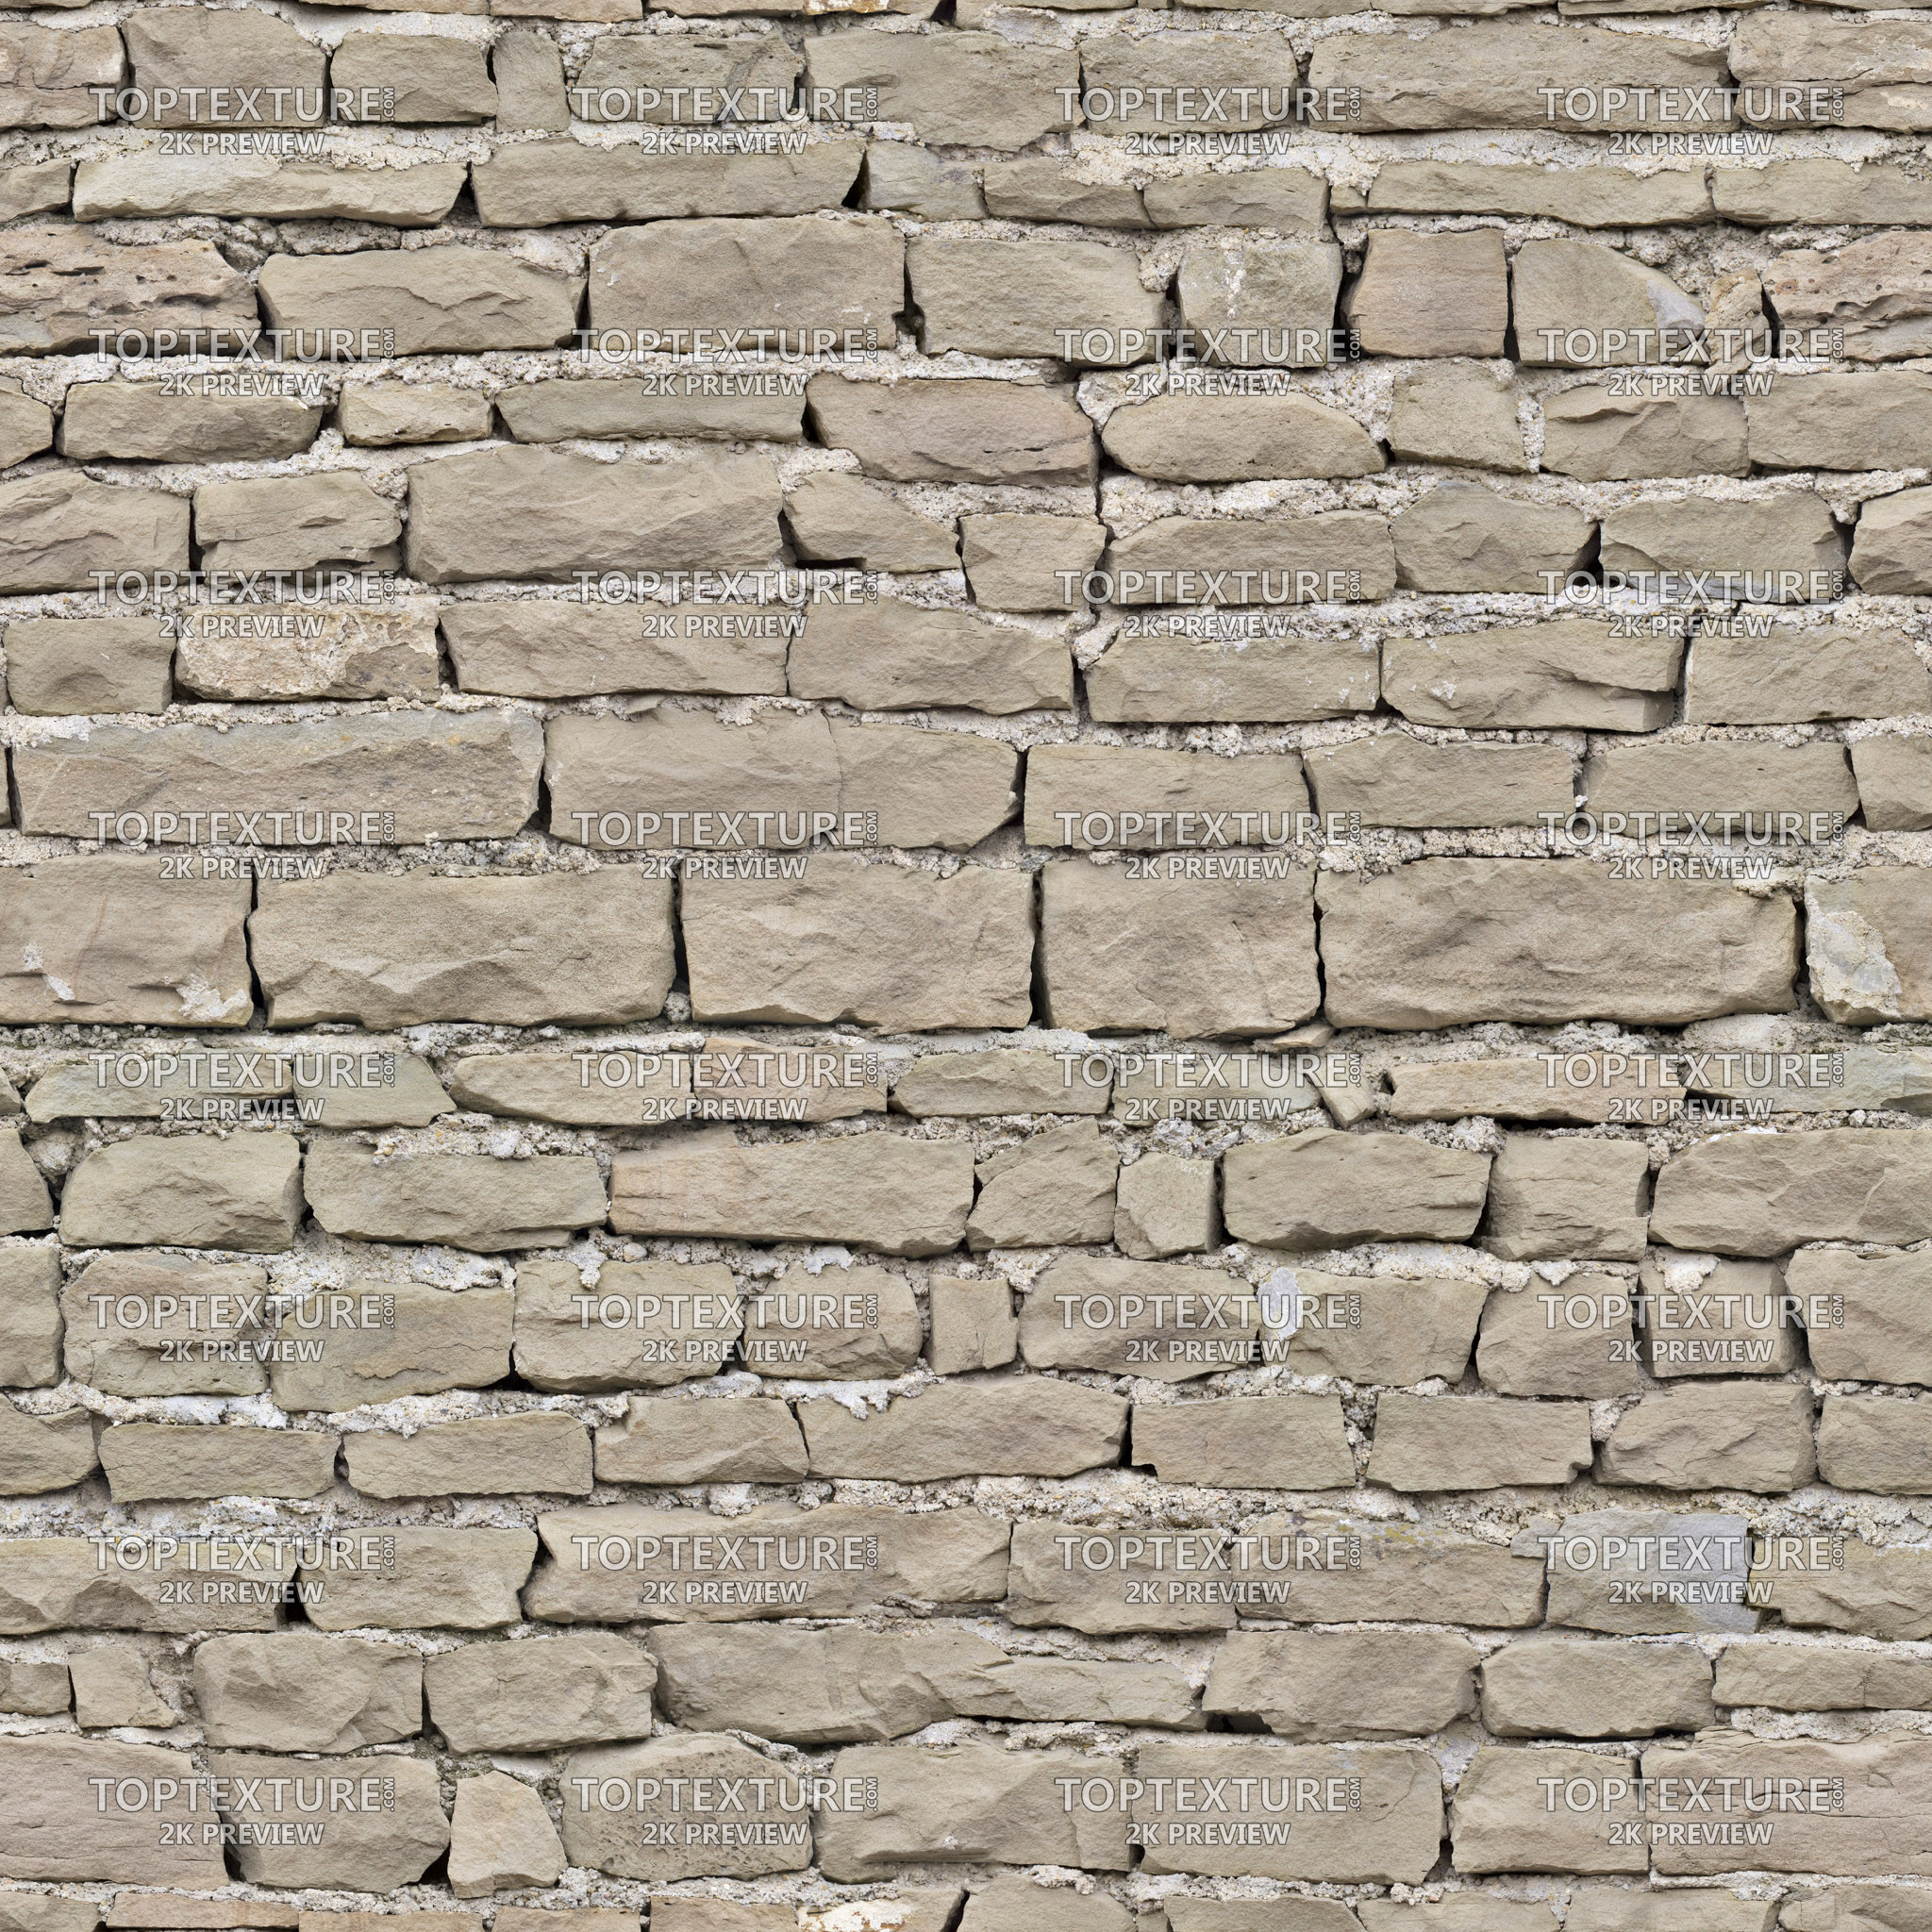 Beige Layered Stone Wall - 2K preview